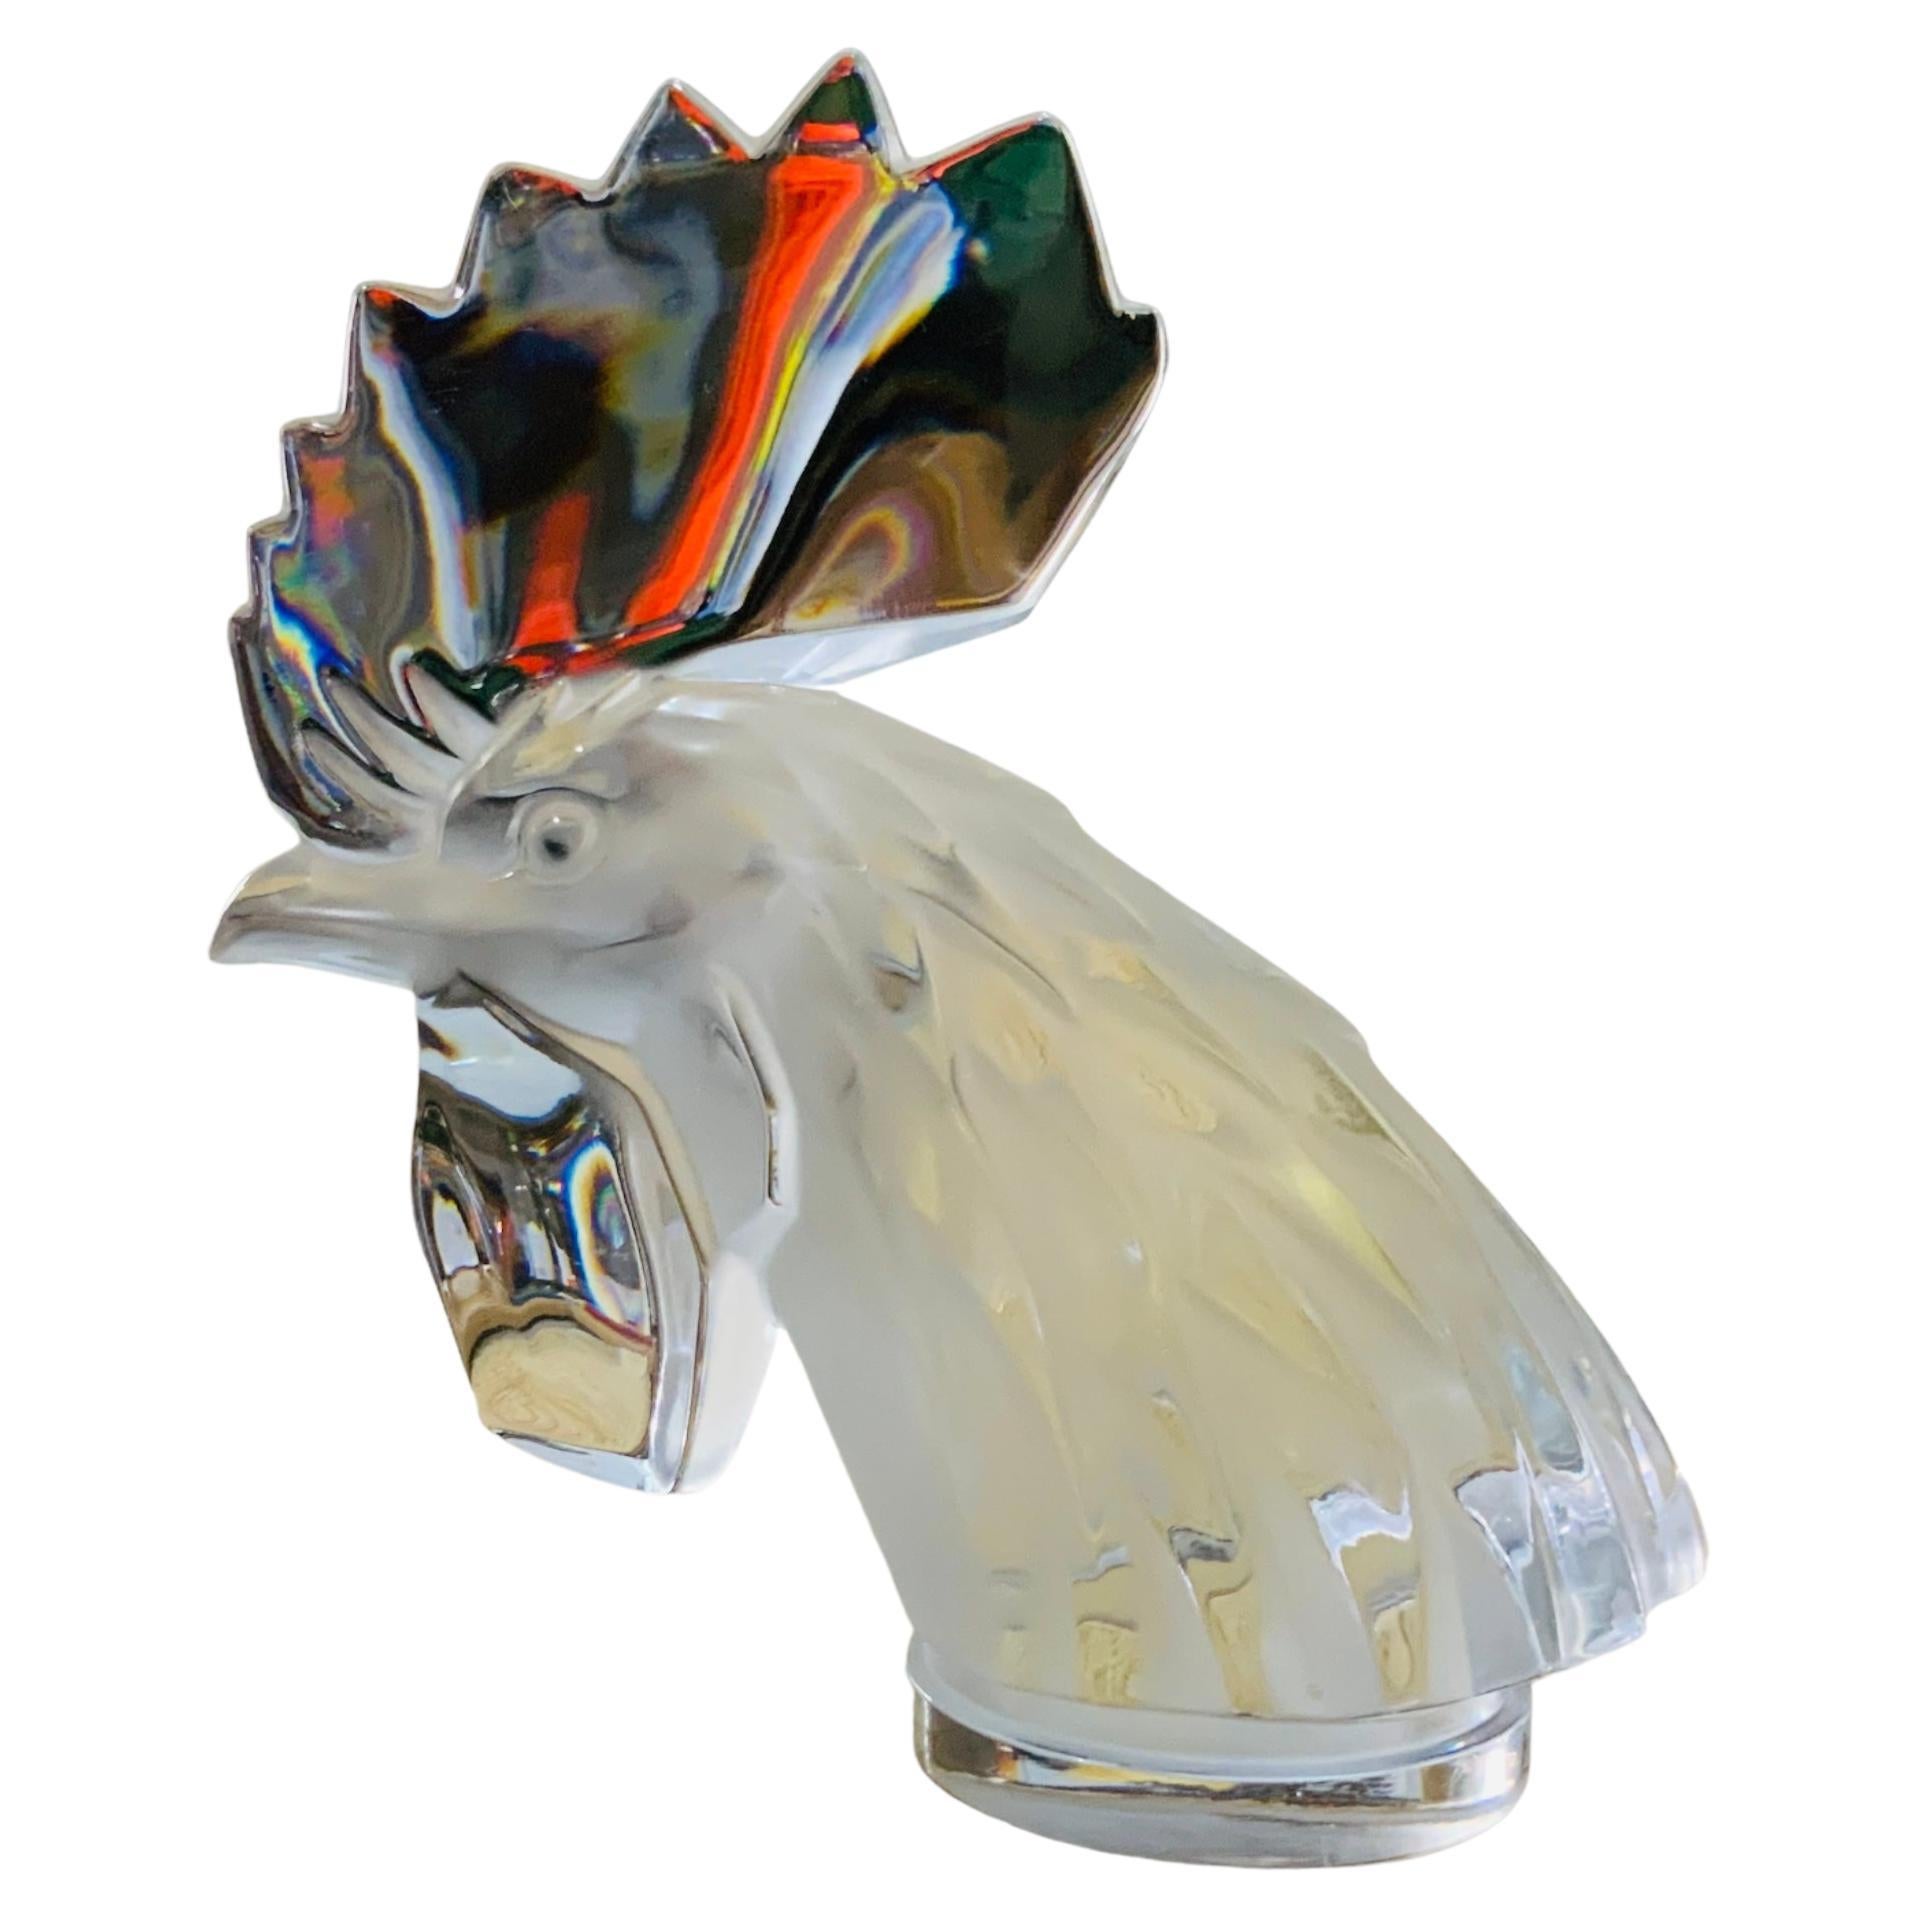 This is a Lalique Crystal Mascot Rooster Tete de Coq small bust/paperweight. It depicts a very well done clear crystal rooster. It has the Lalique France acid etched hallmark below the base.